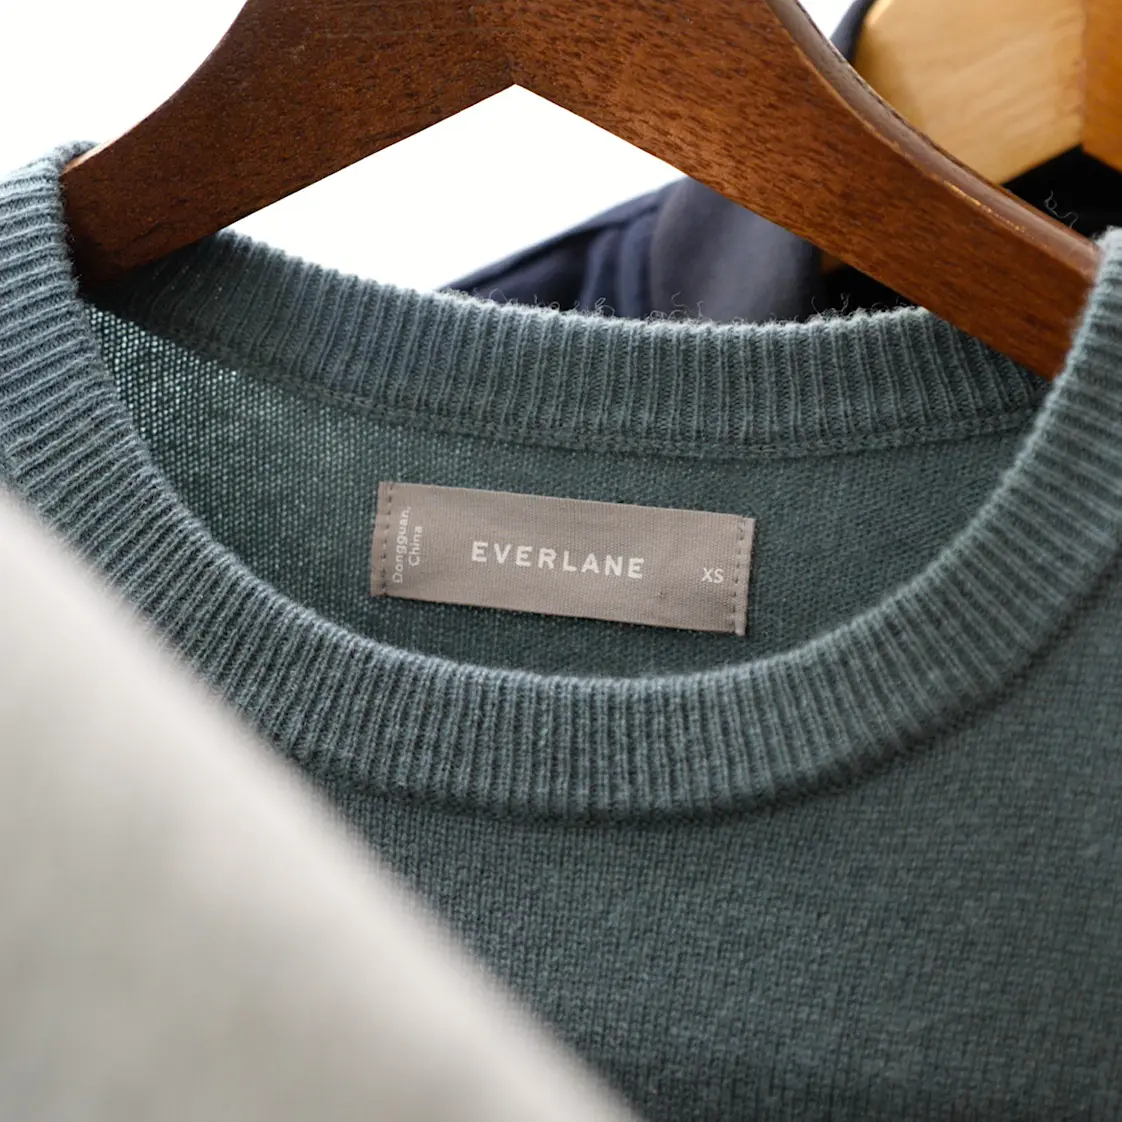 Everlane Review for Men: What to Buy & What to Avoid - The Modest Man